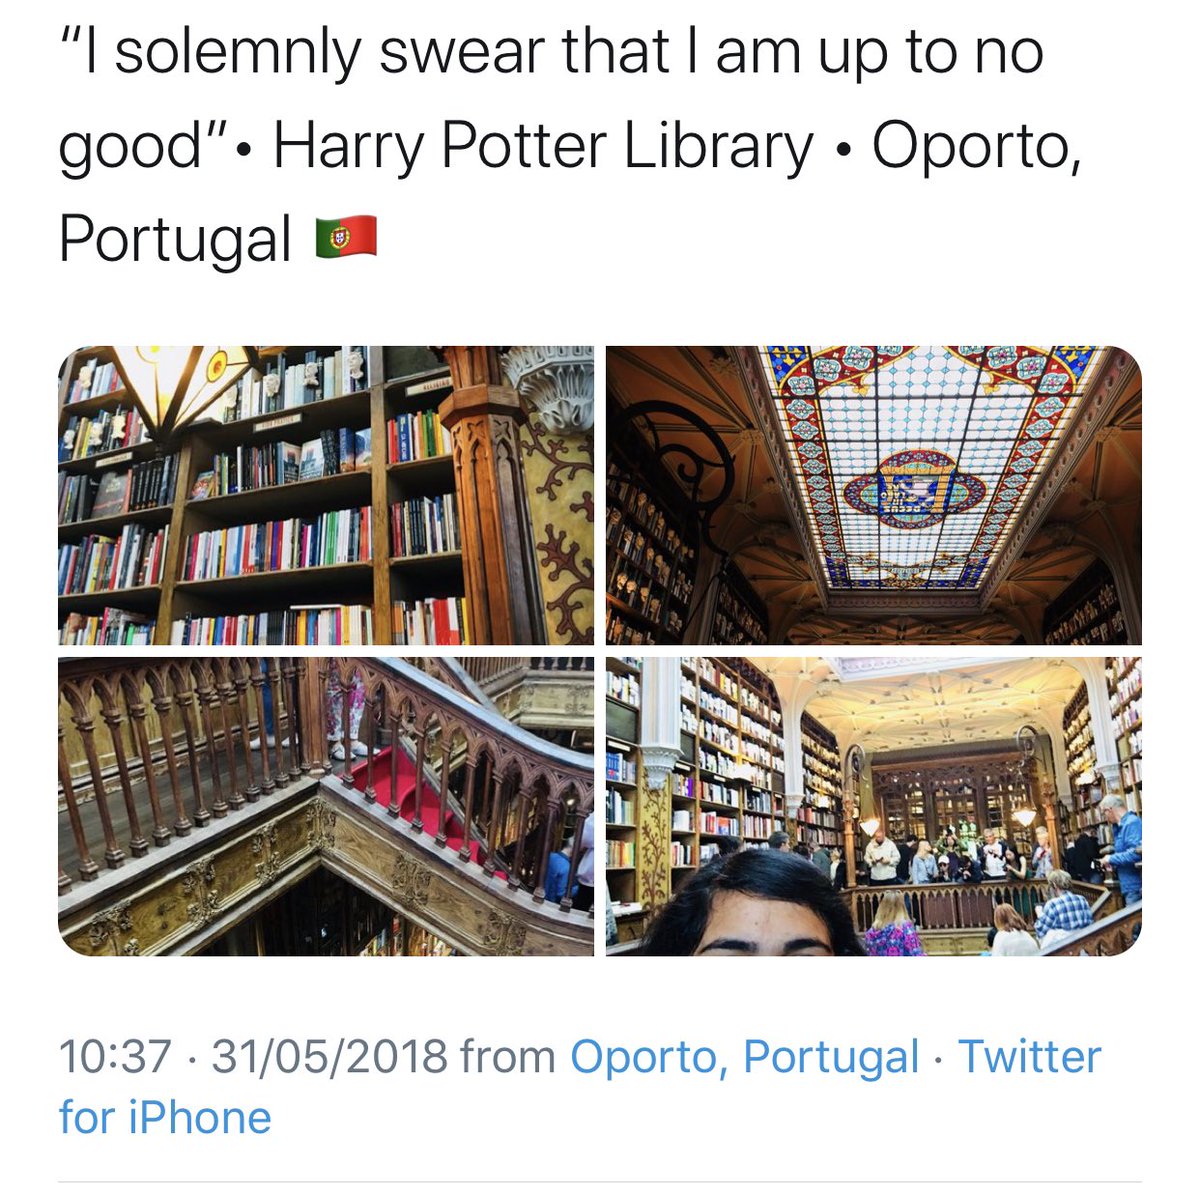 For instance, I never visited this bookshop in Oporto. Never even knew of its existence! It’s beautiful and I wish I *had* visited it, but it has nothing to do with Hogwarts!